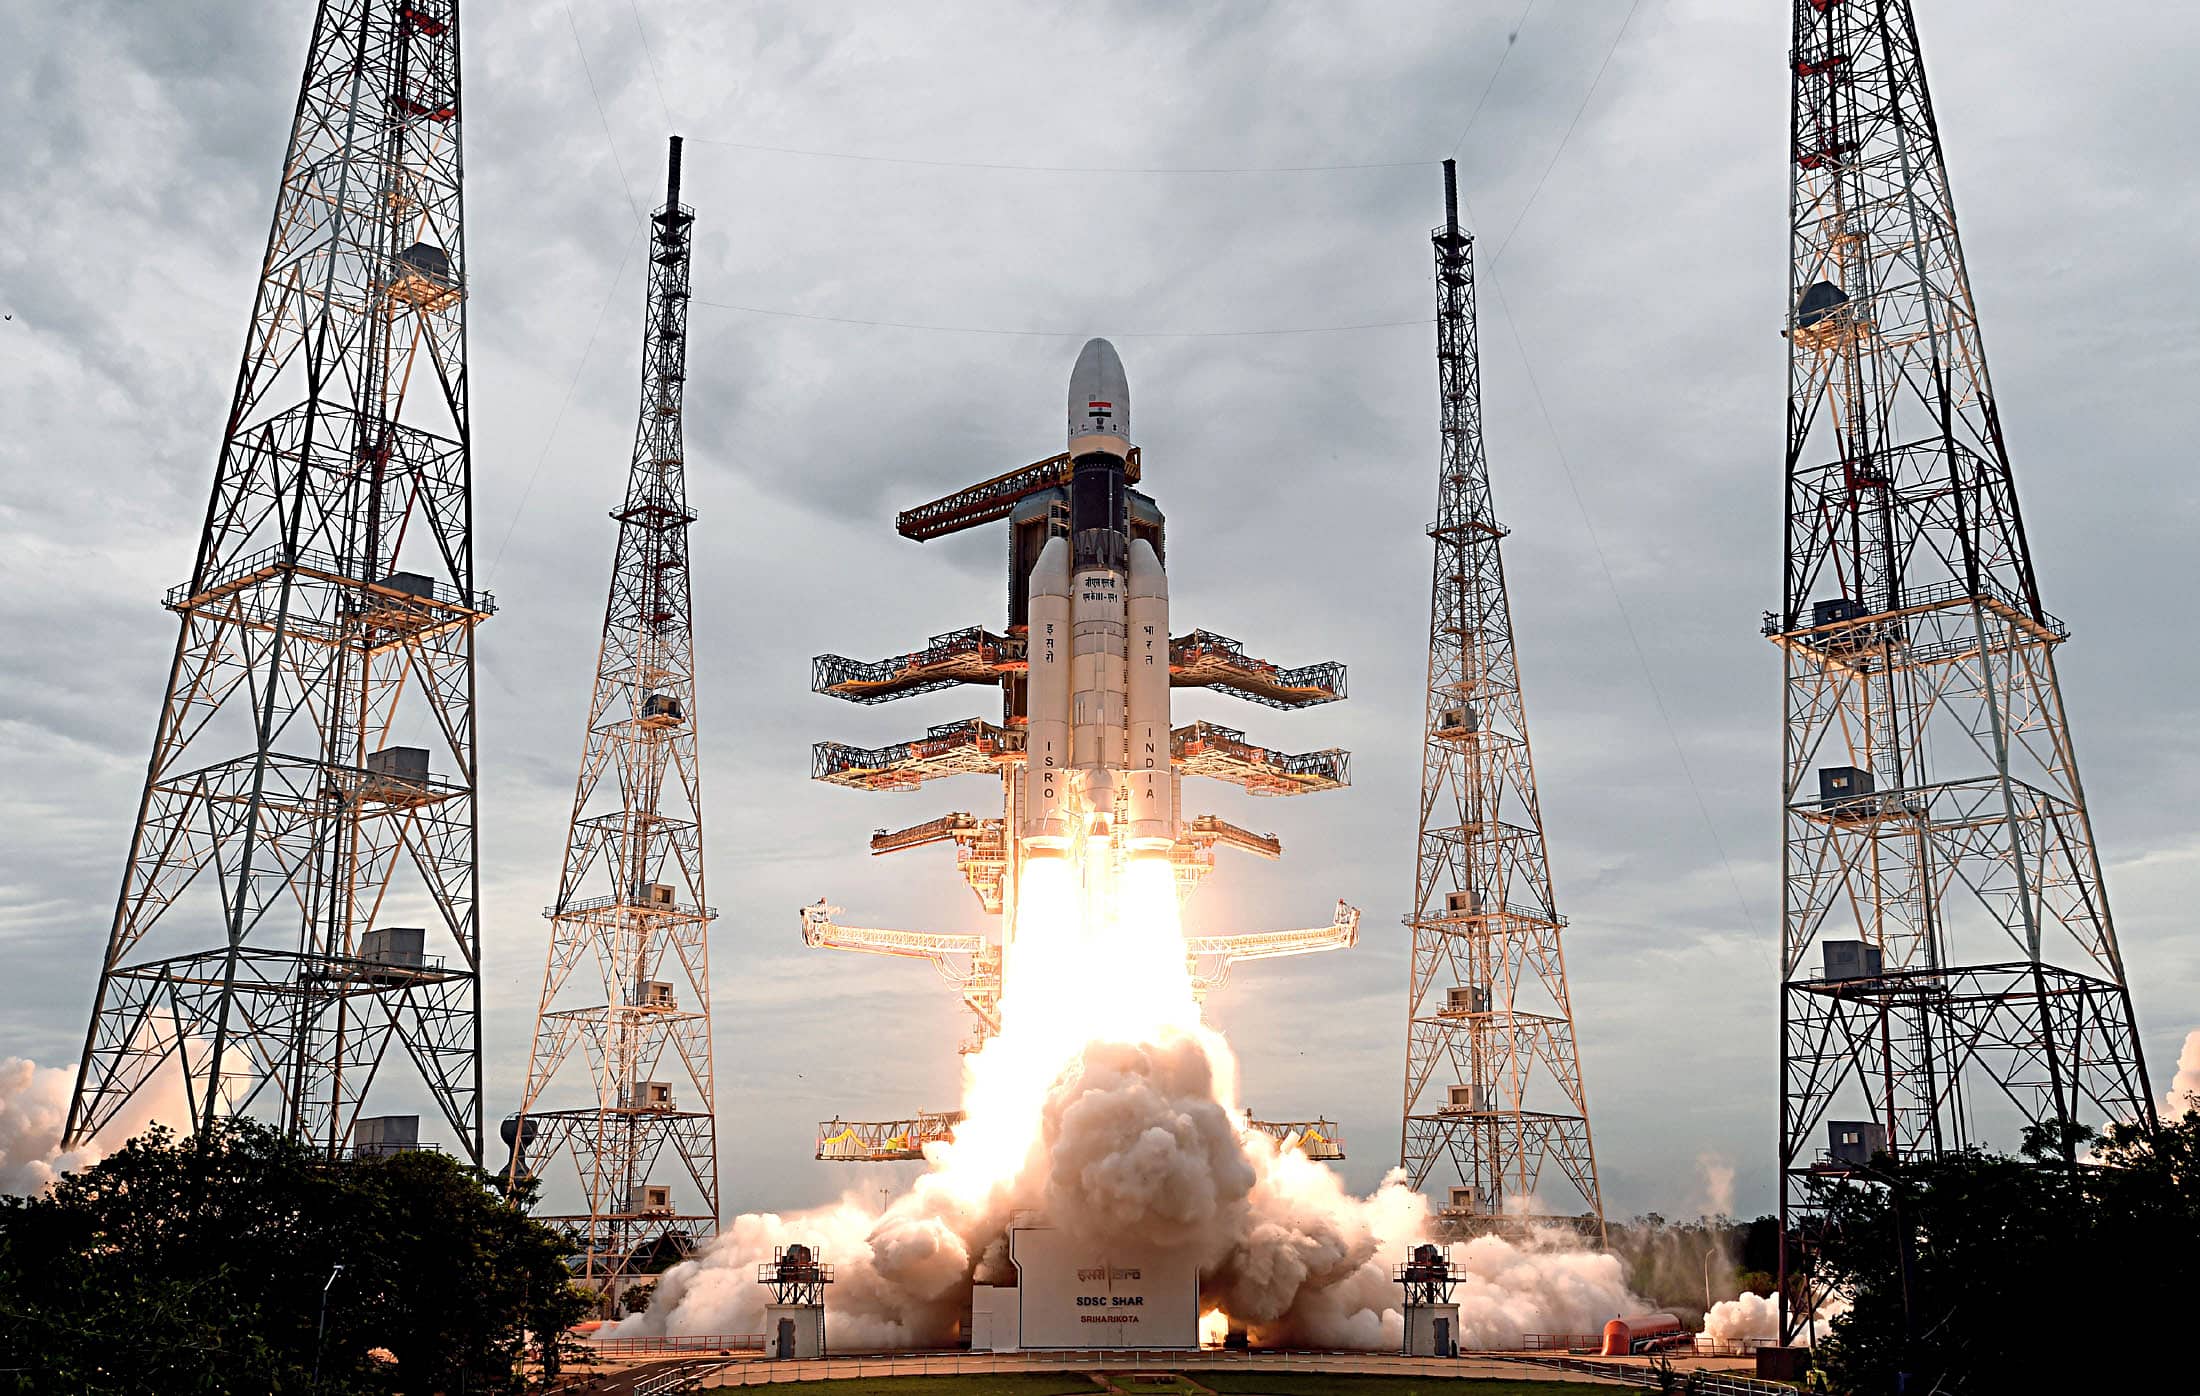 Political leaders hail ISRO for successful launch of Chandrayaan-2